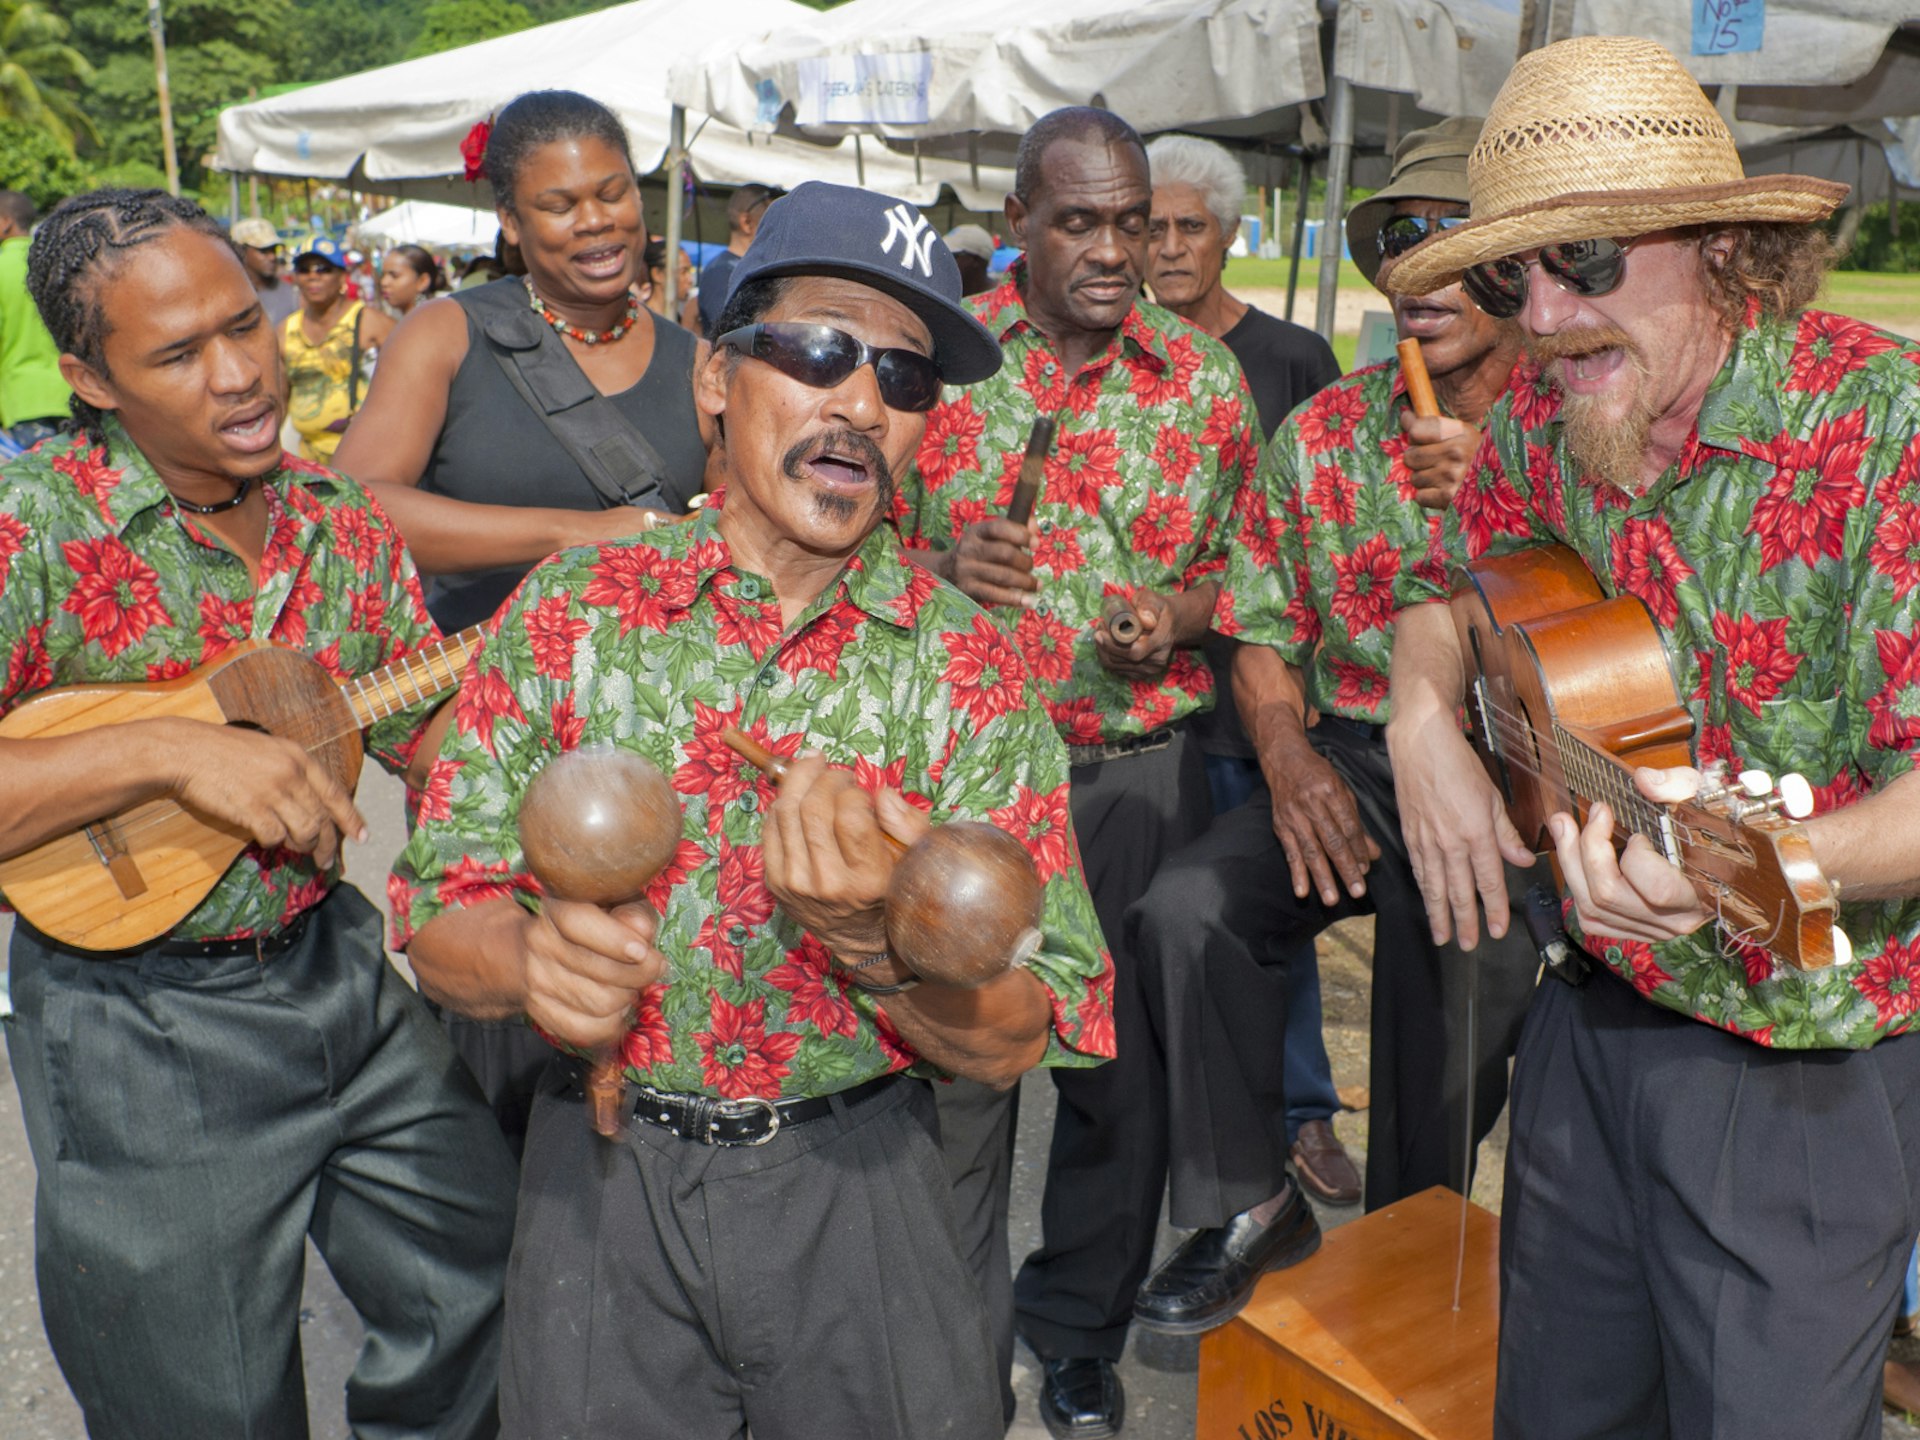 Six musicians play traditional parang music in Trinidad 